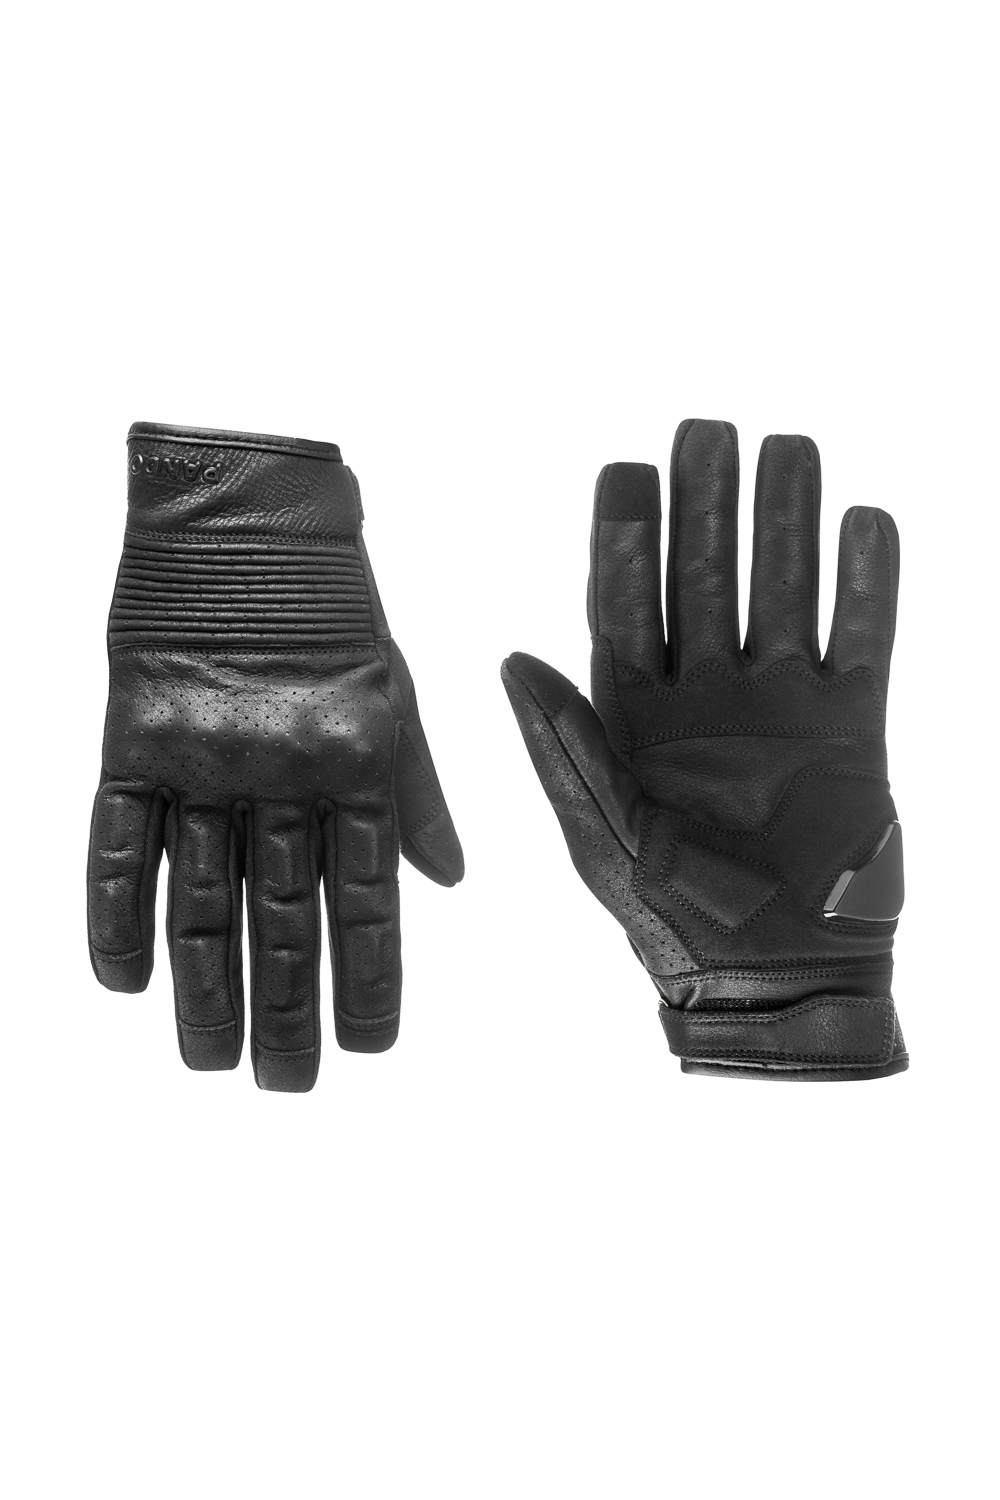 Onyx Black 01 motorcycle gloves front view 2